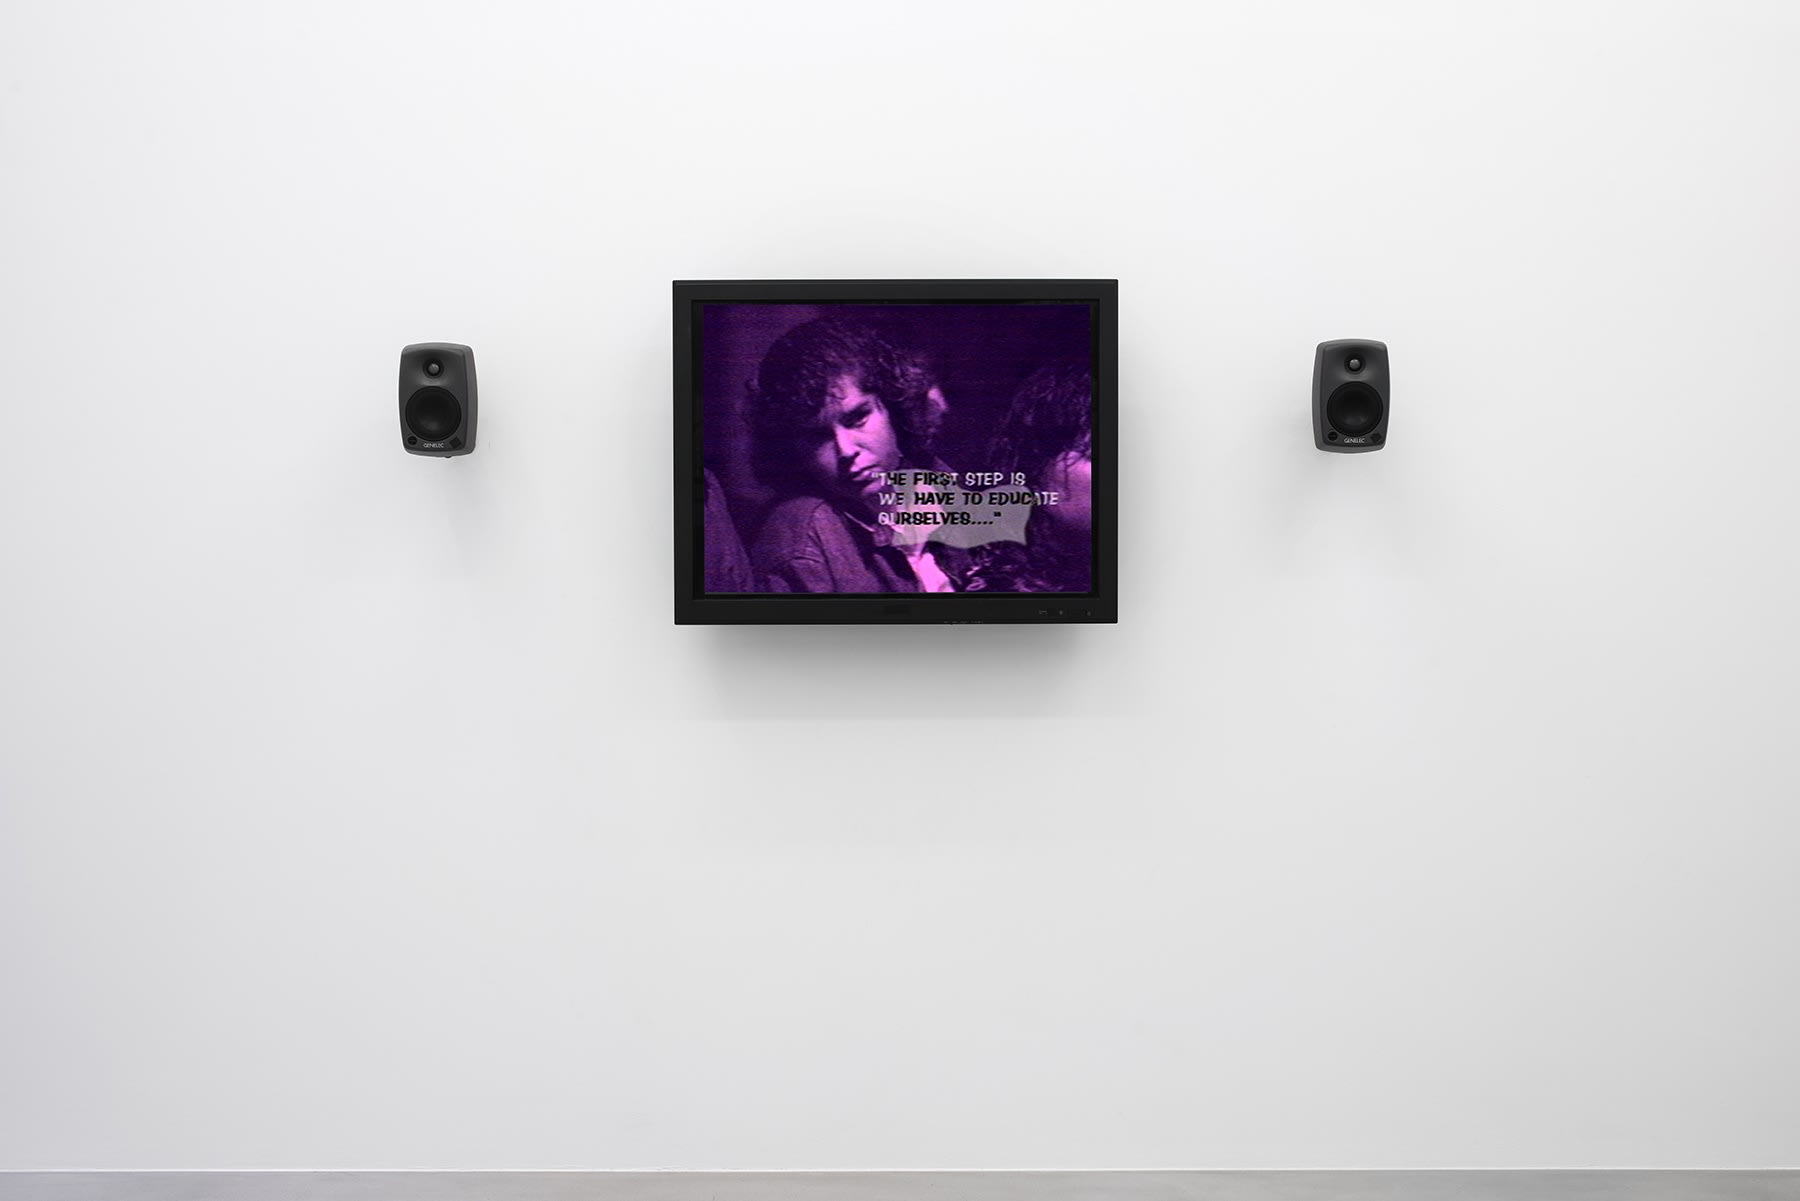 A purple monitor with 2 speakers displays a woman with text reading "The first step is we have to educate ourselves." 